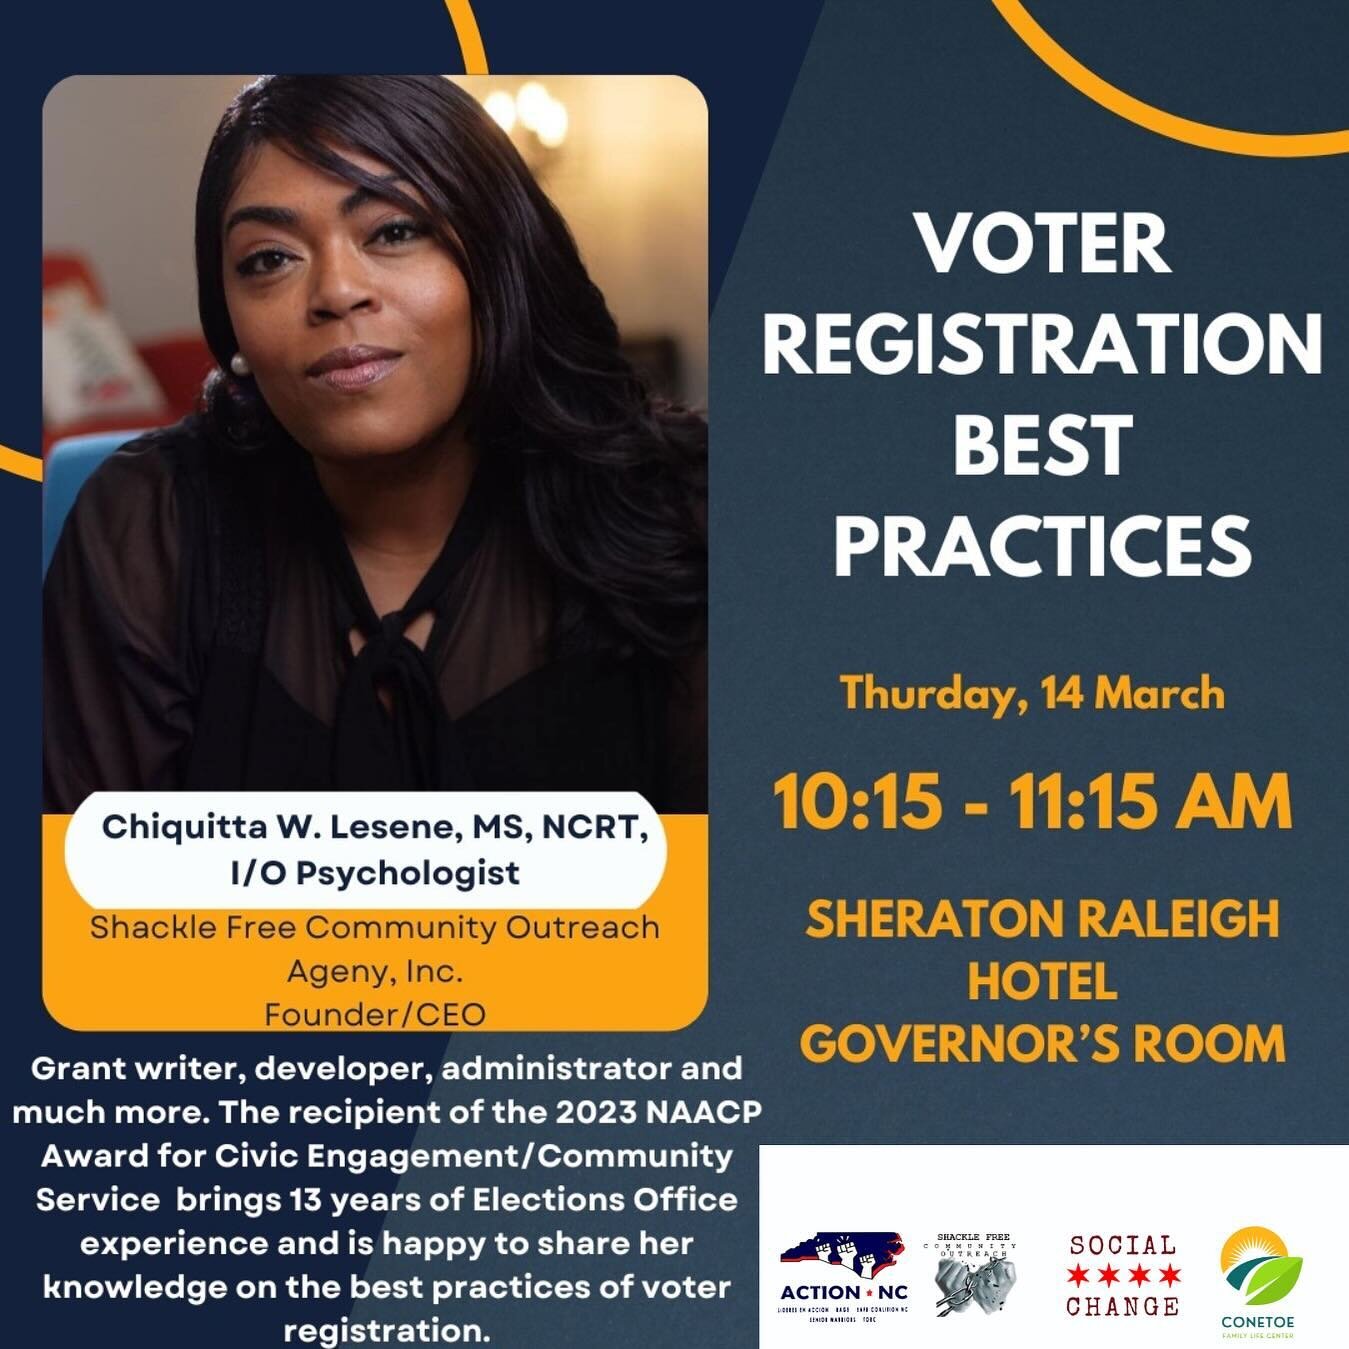 ⭐️Join Chiquitta W. Lesene, @chiquittalesenerealtor an accomplished I/O Psychologist and civic engagement leader, for an insightful session on Voter Registration Best Practices TOMORROW 3/14. 

⭐️Discover the tips and strategies from a seasoned exper